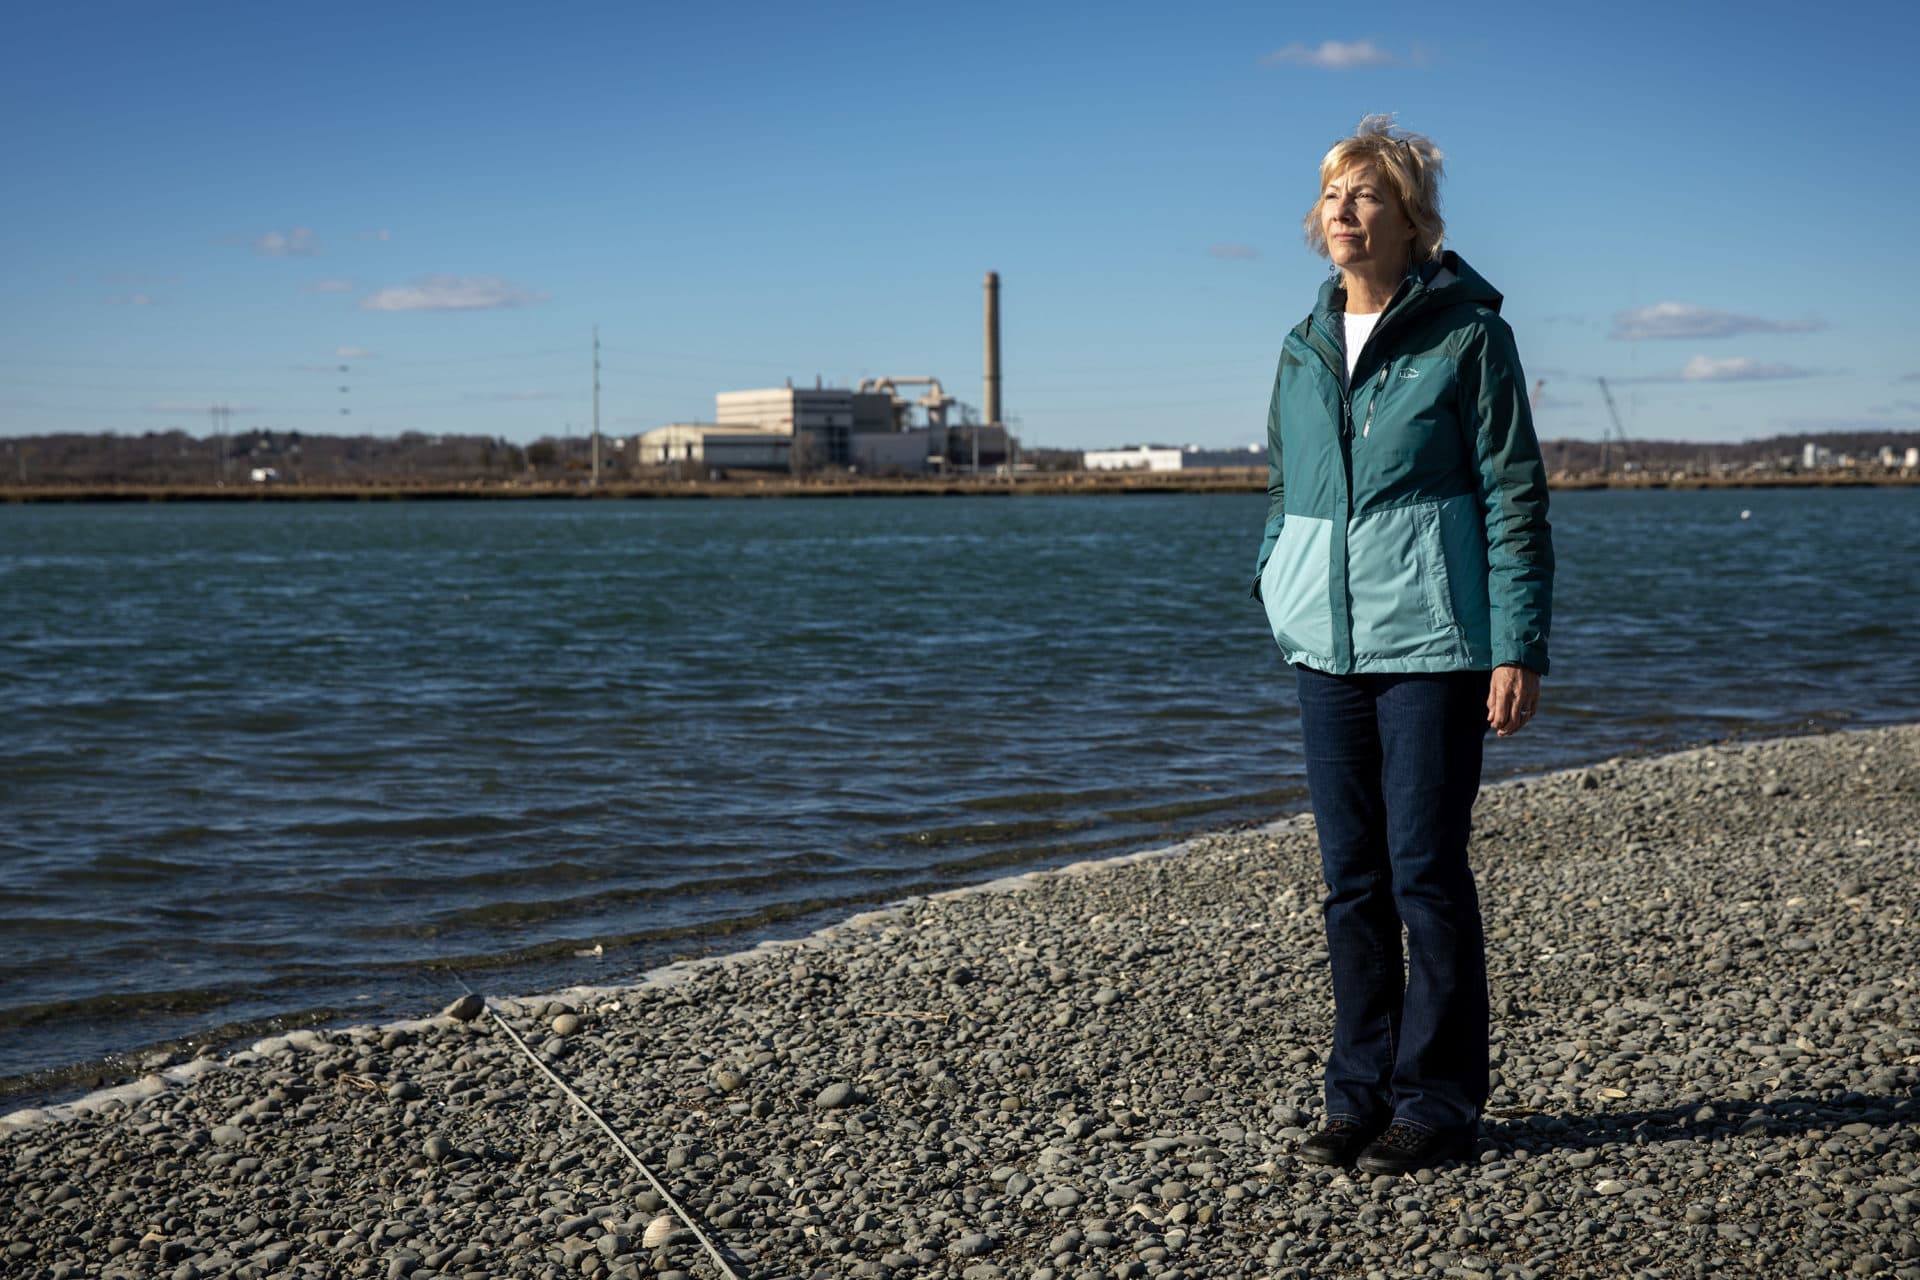 Loretta LaCentra stands near her home in Revere, across the Pines River from the Saugus incinerator and landfill. (Robin Lubbock/WBUR)